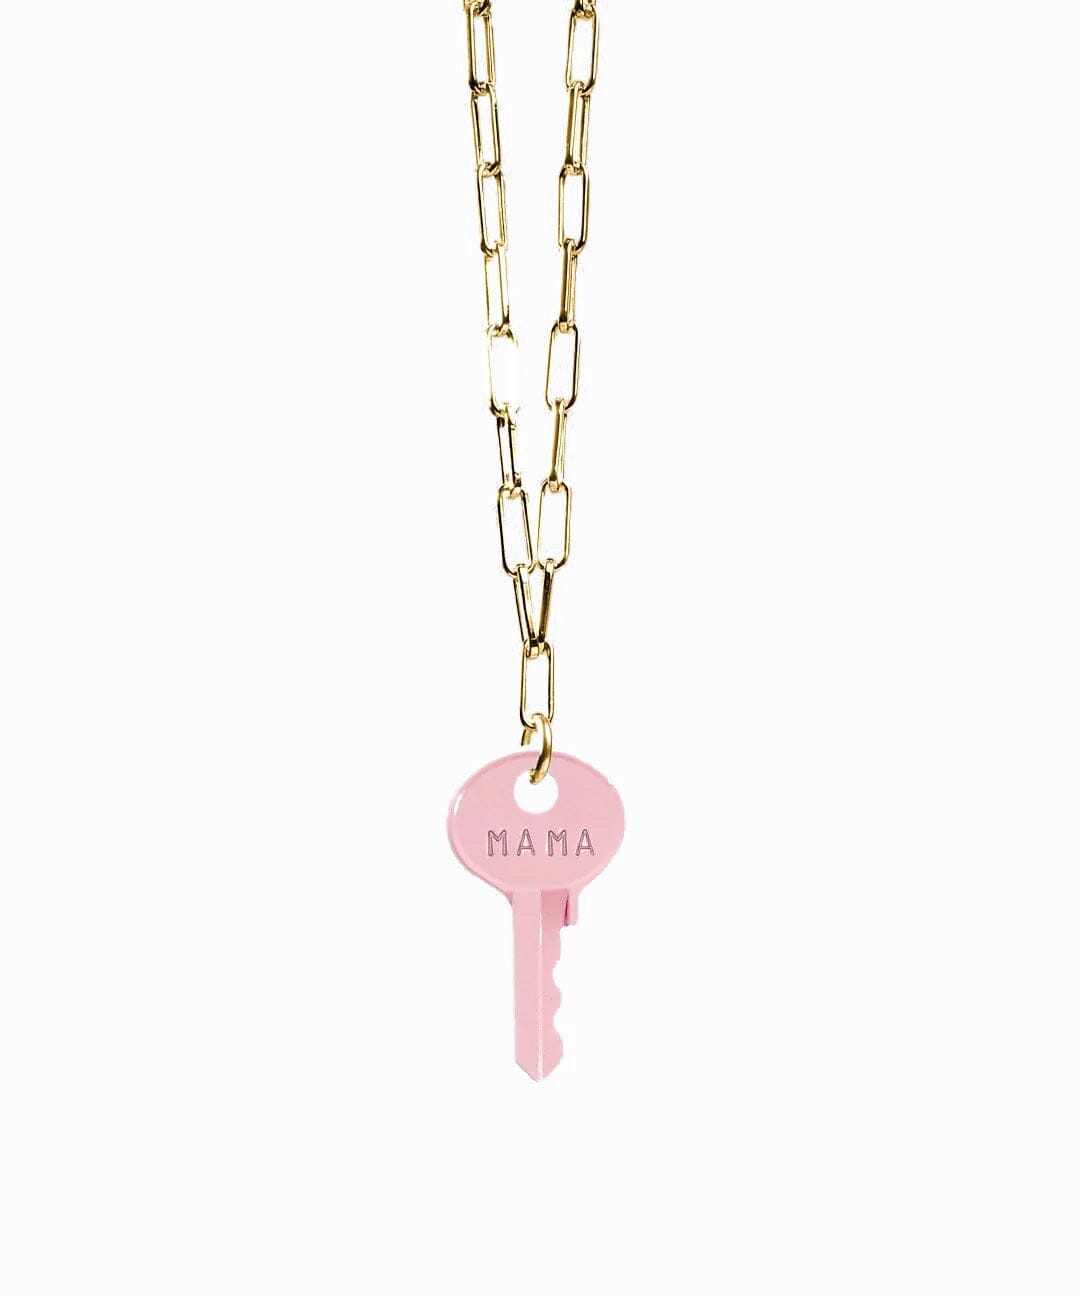 N - Pastel Pink Dainty Brooklyn Necklace Necklaces The Giving Keys 